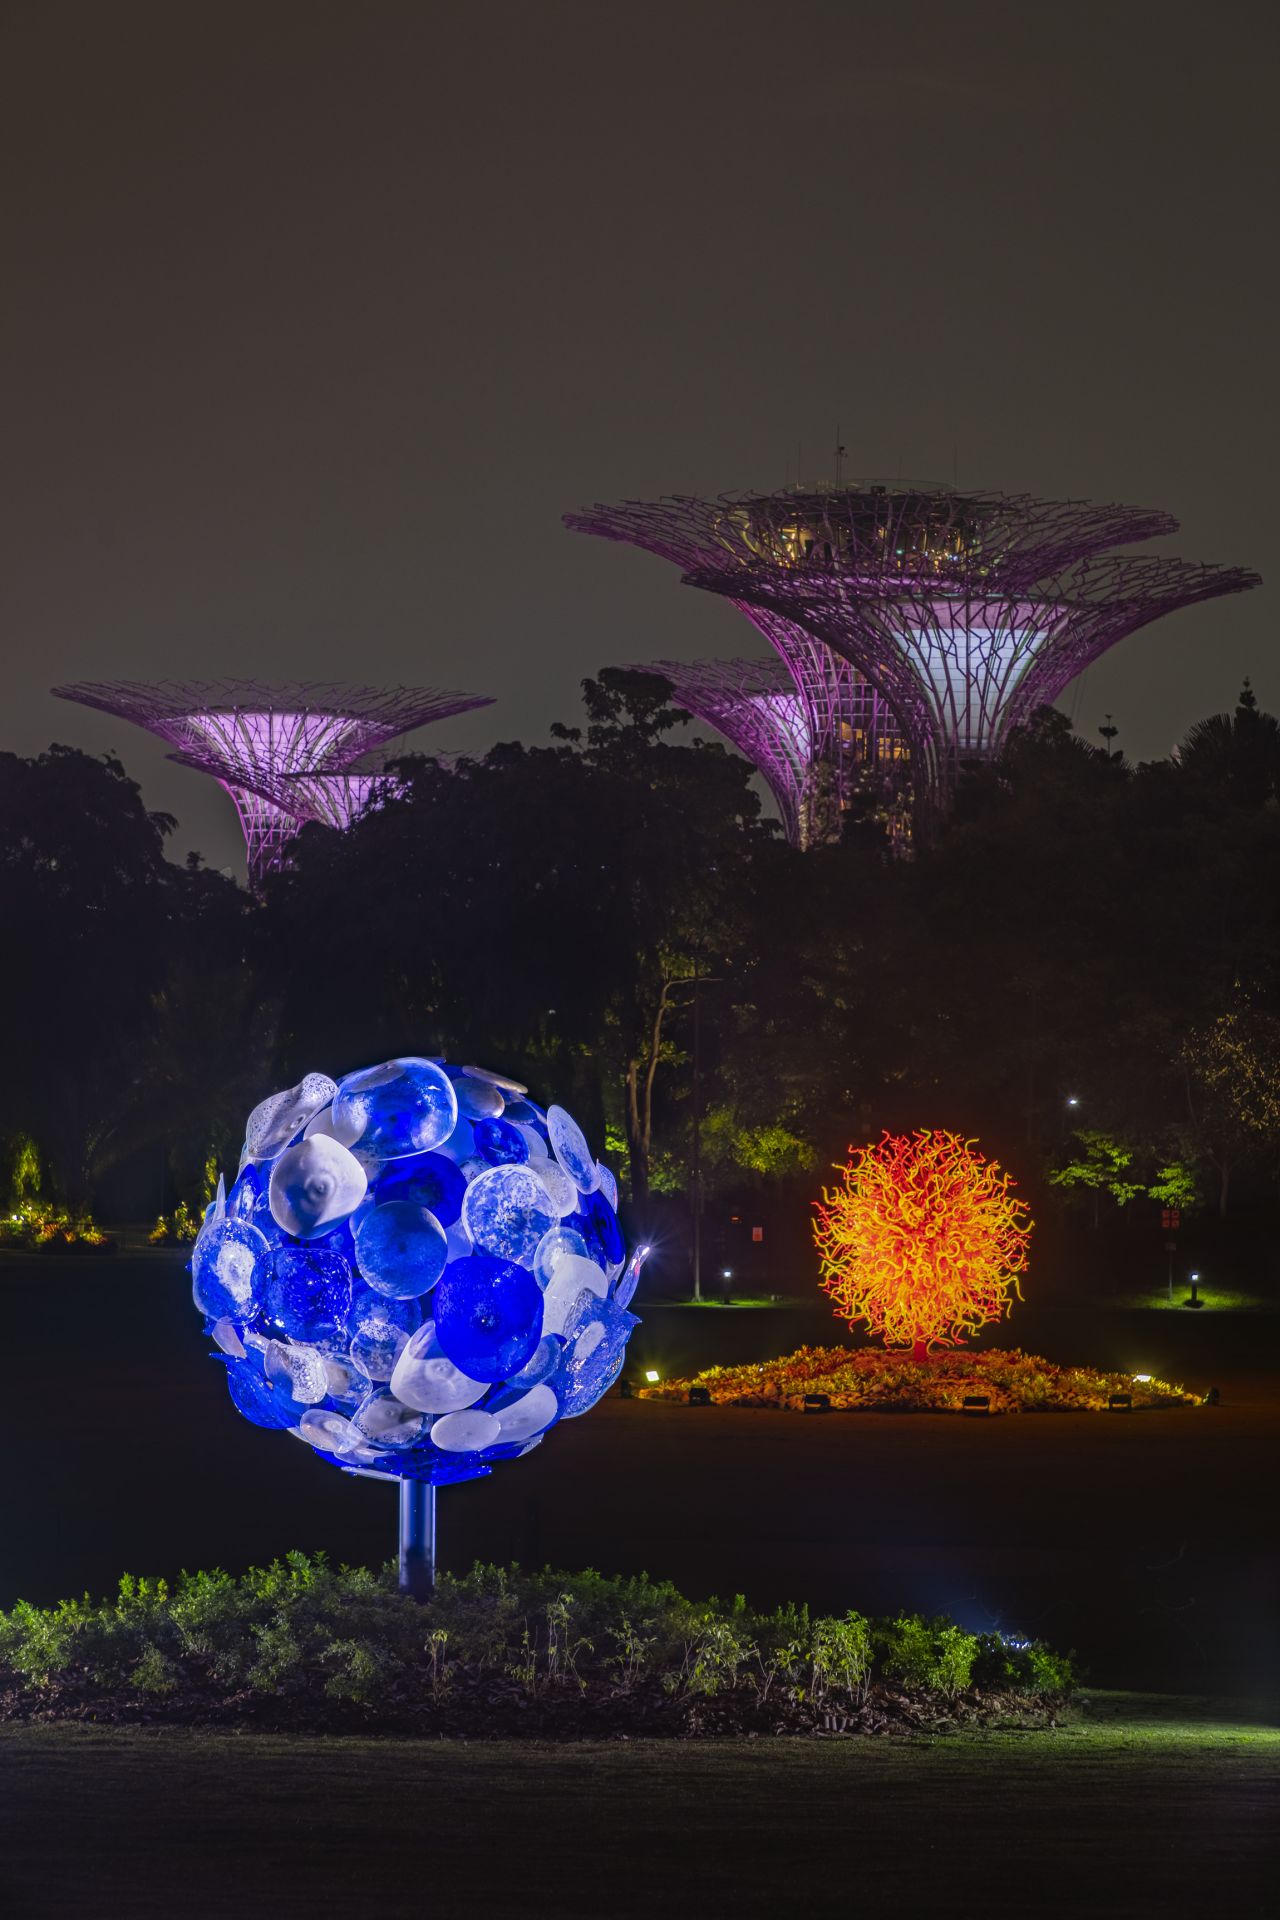 Dale Chihuly's glass culptures, "Moon" (1999) and "Setting Sun" (2020).